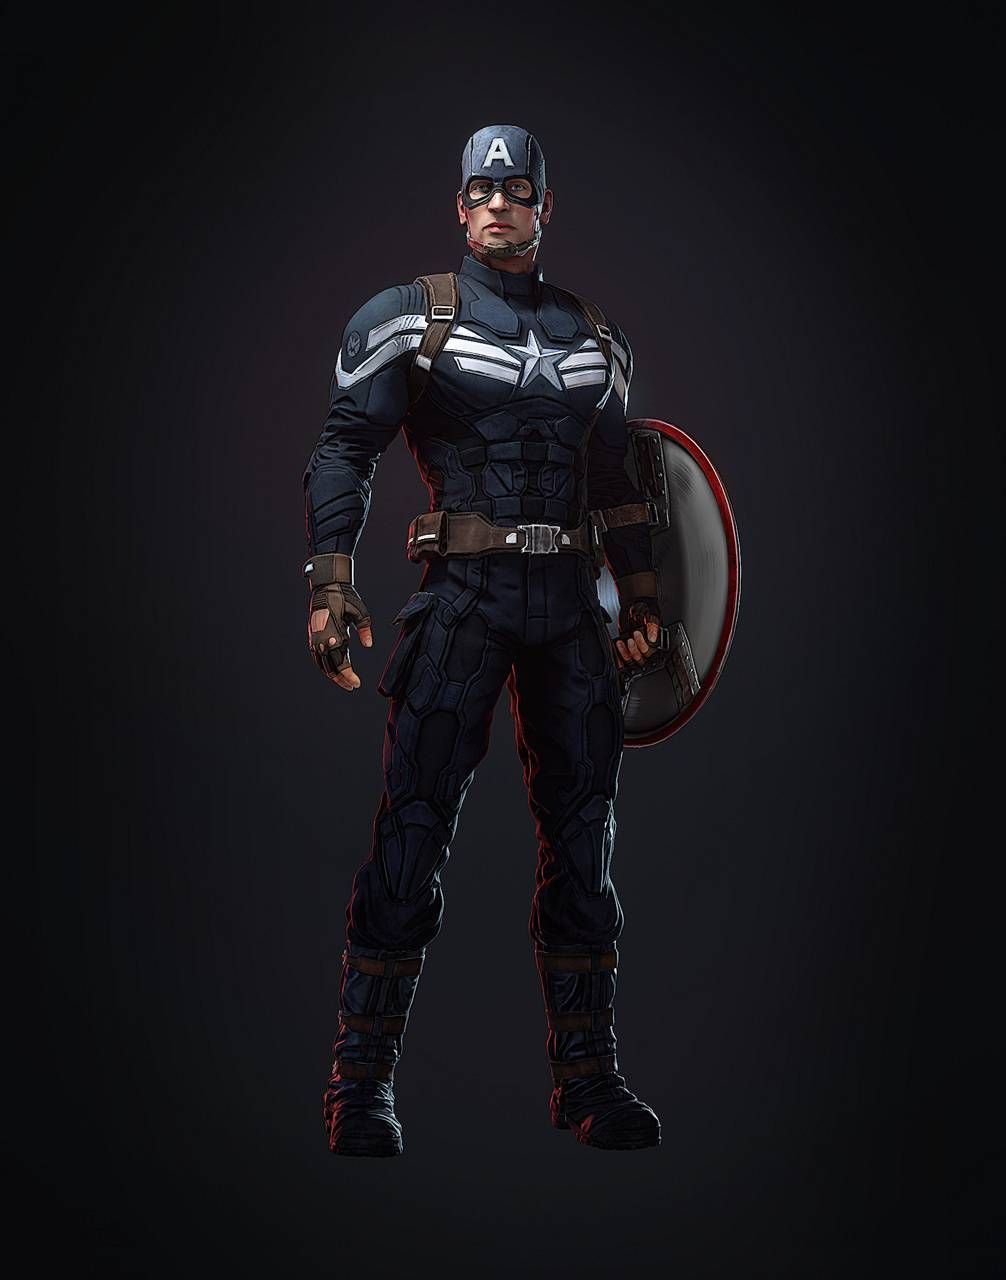 Download Captain America Wallpaper by upendrakumar1990 now. Browse. Captain america wallpaper, Captain america suit, Captain america costume